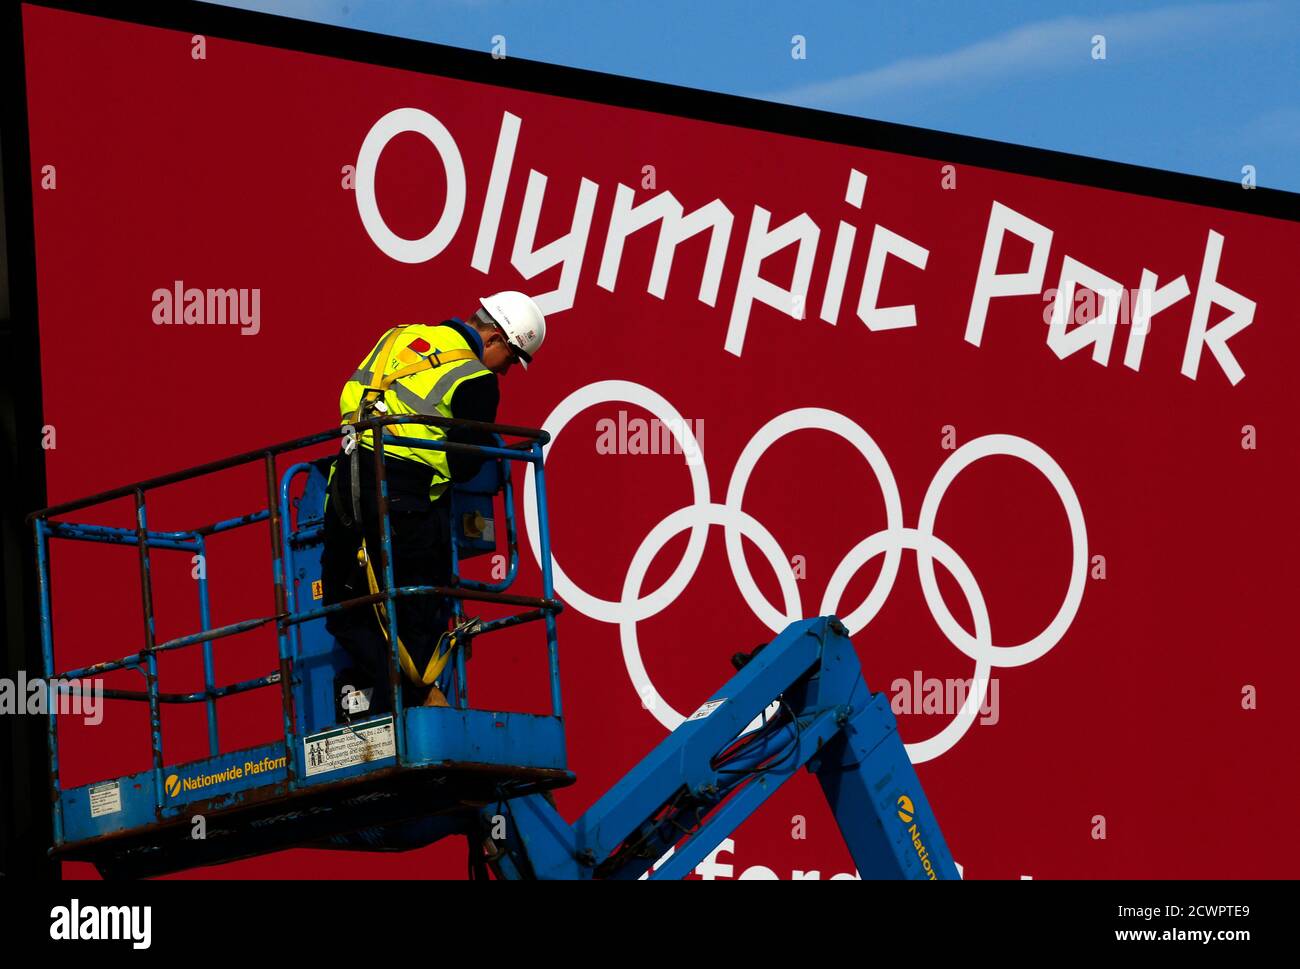 A worker adjusts his position on a cherry picker in front of one of the signs at the entrance to the Olympic Park, Stratford, east London, July 19, 2012. The 2012 London Olympic Games will begin in just over a week.  REUTERS/Andrew Winning (BRITAIN) Stock Photo